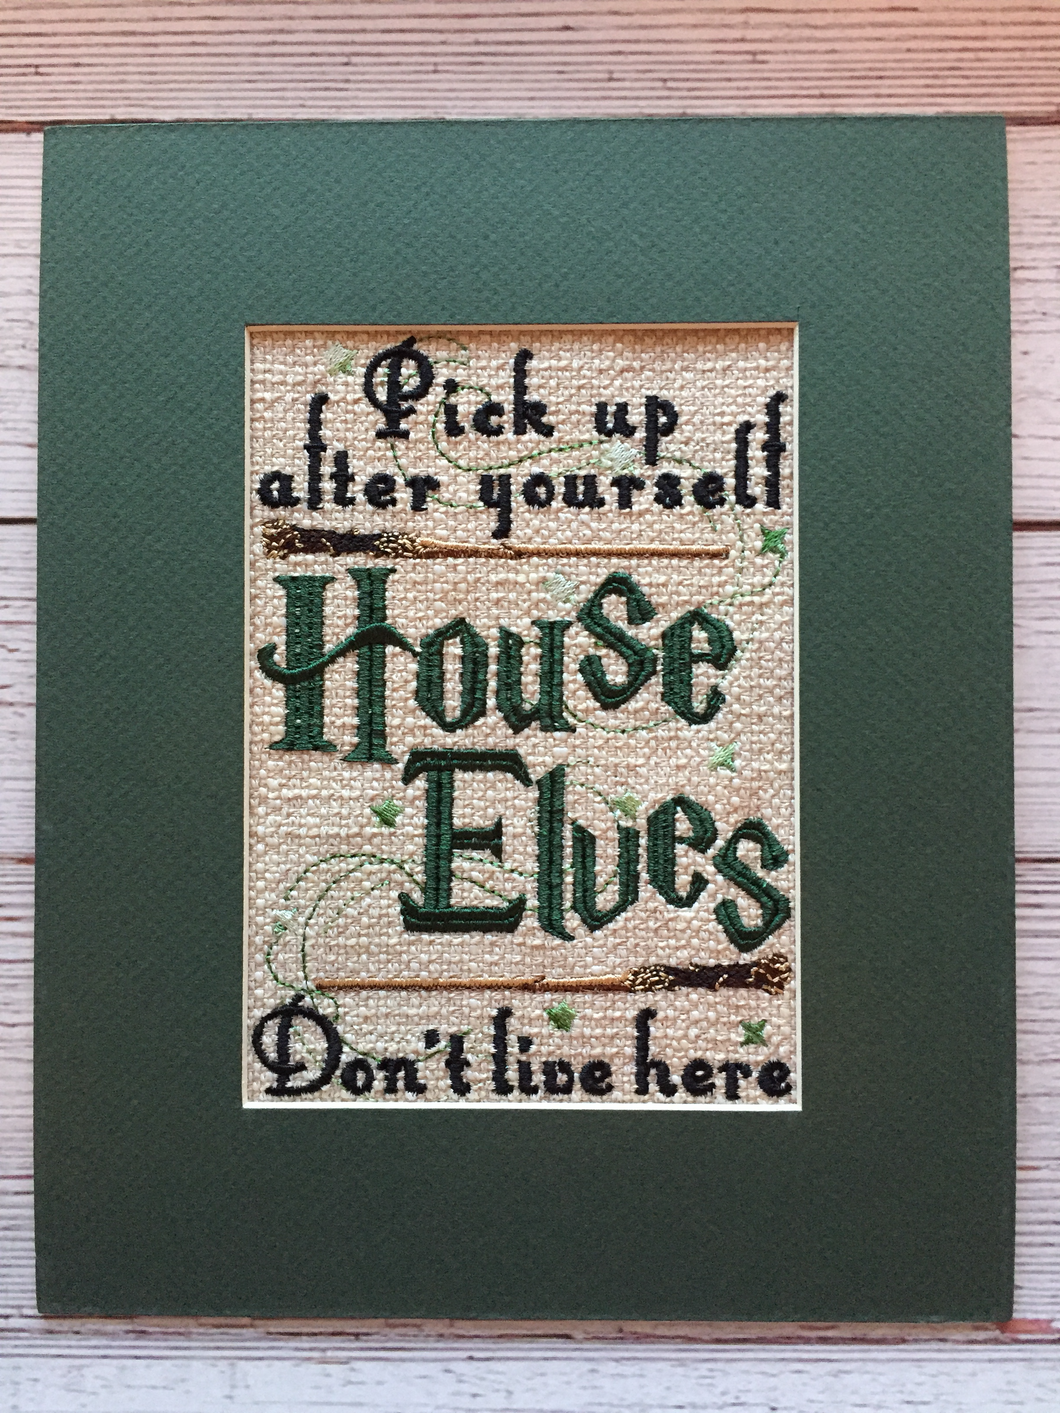 Embroidered Wall Hanging - Pick Up After Yourself, House Elves Don't Live Here - Geeky Embroidery